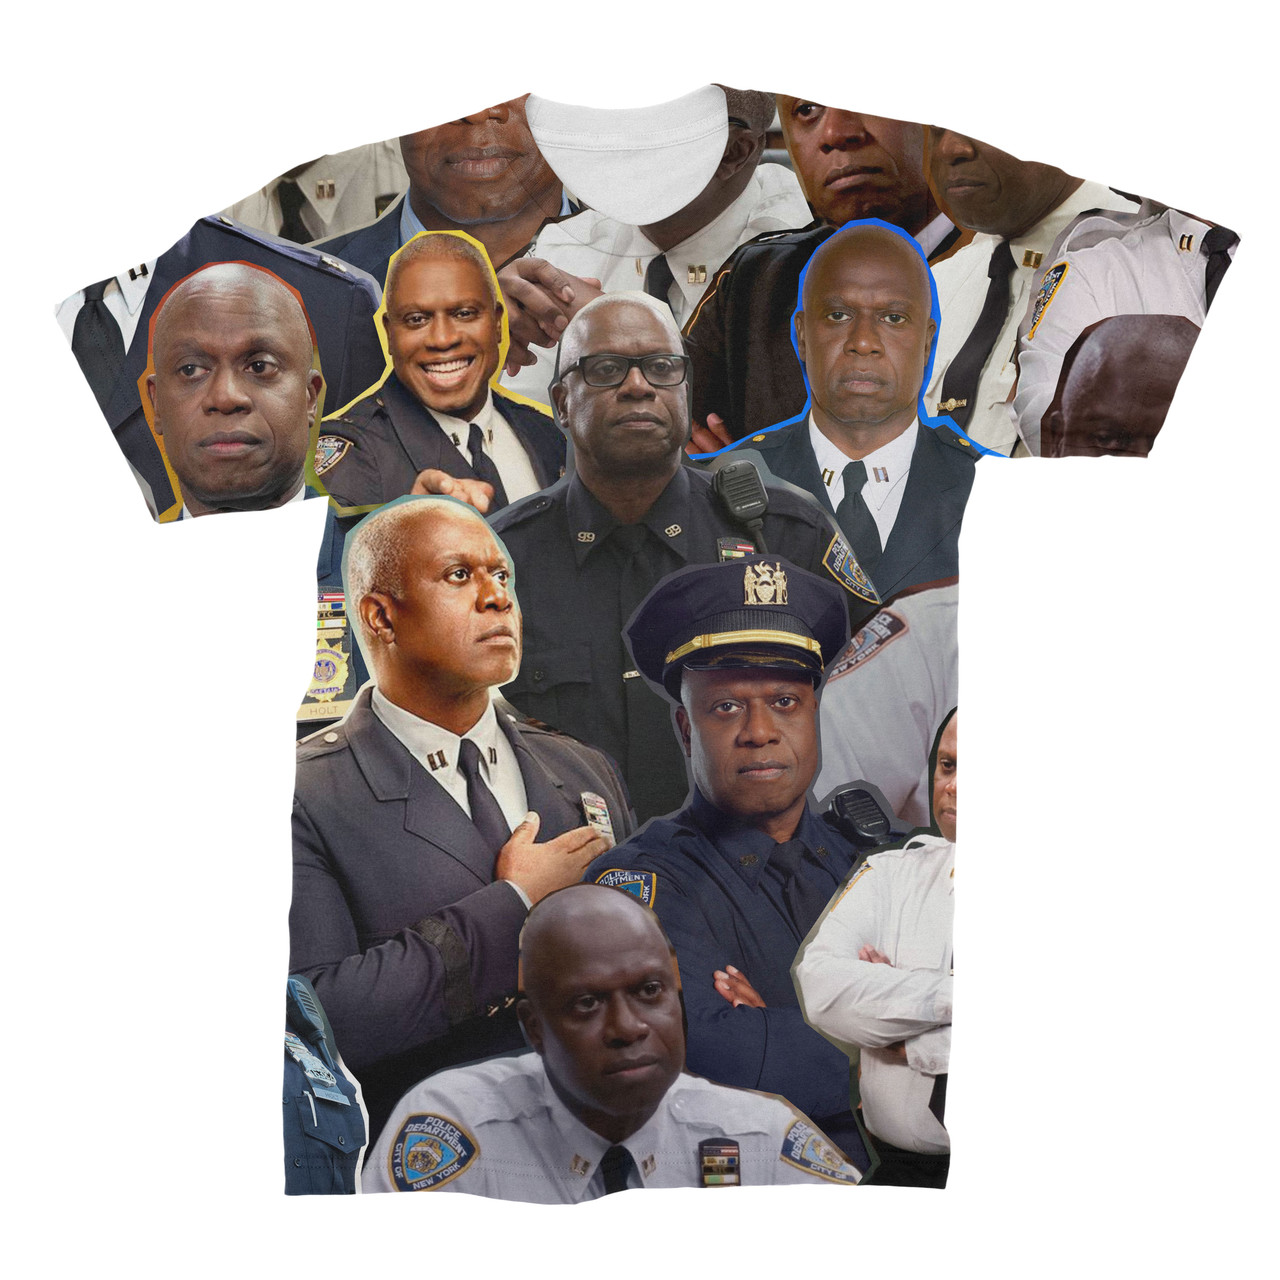 Captain Ray Holt Photo Collage T-Shirt - Subliworks